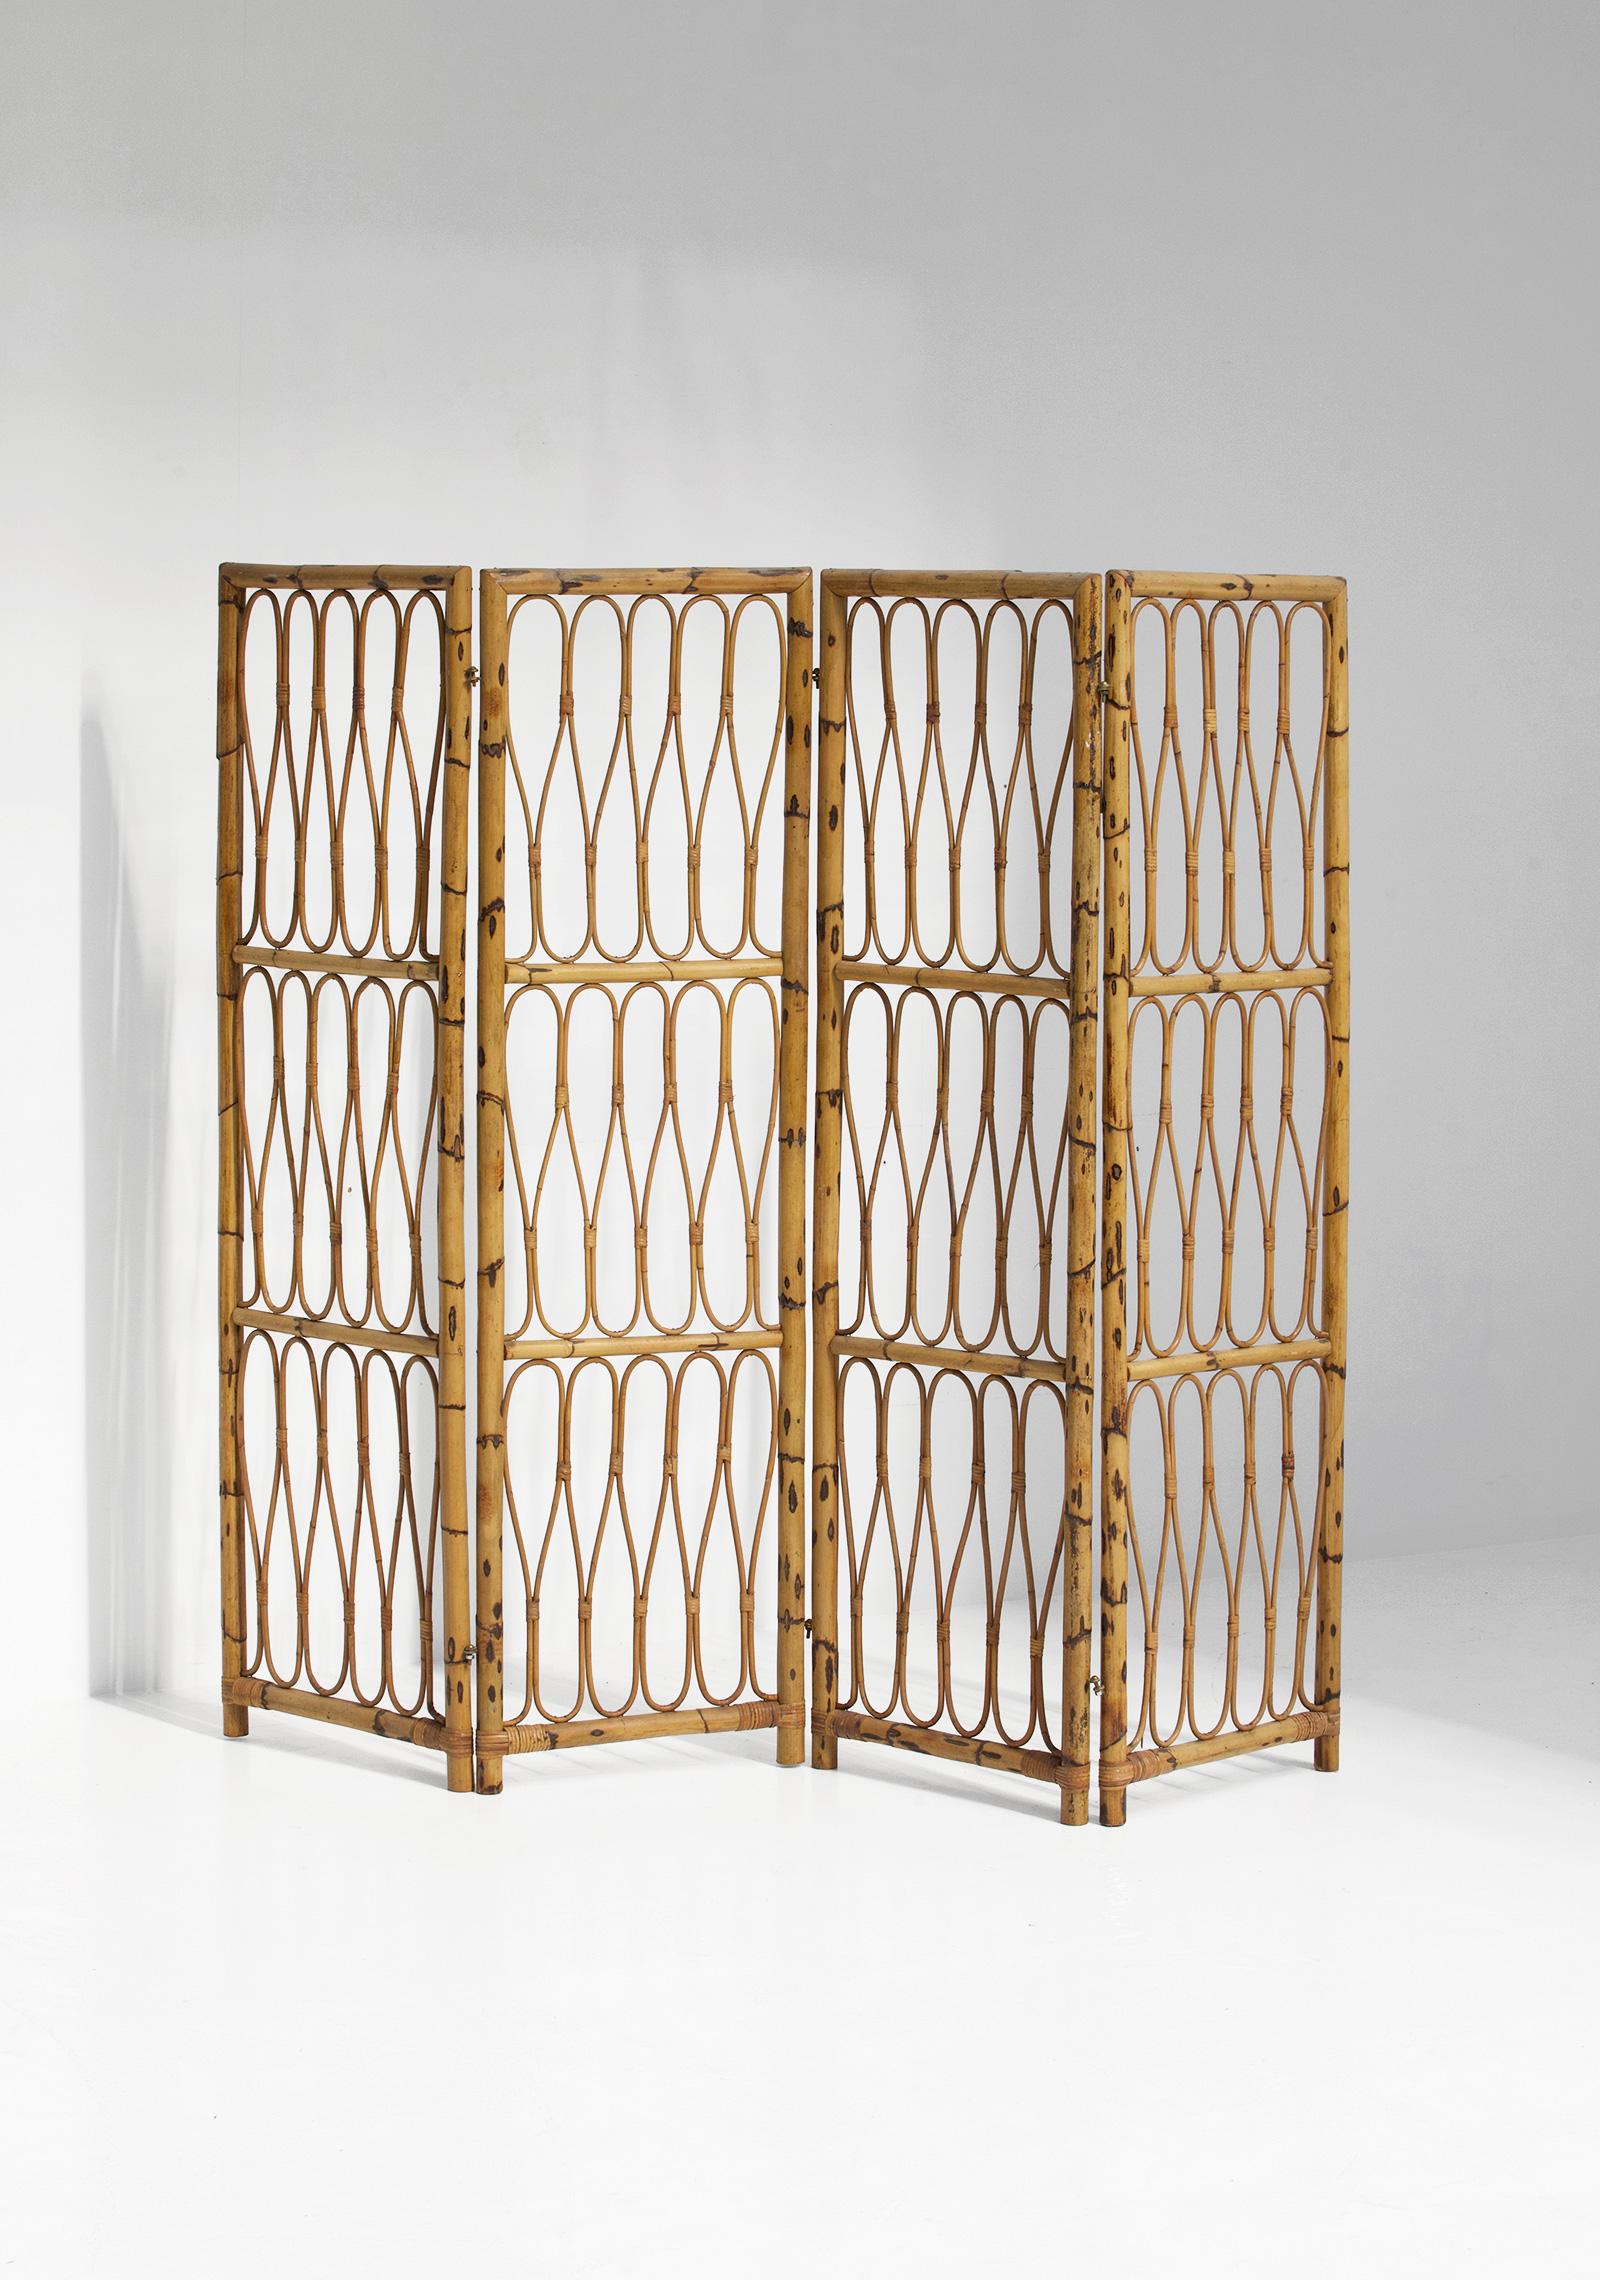 Rattan folding screen, Italy 1950s

Bamboo piece in the style of Vivai del Sud, Franco Albini, Gabriella Crespi, Henry Olko
Highly decorative folding screen made in the 1950s. The paravent is fully made in rattan and has little brass attachments